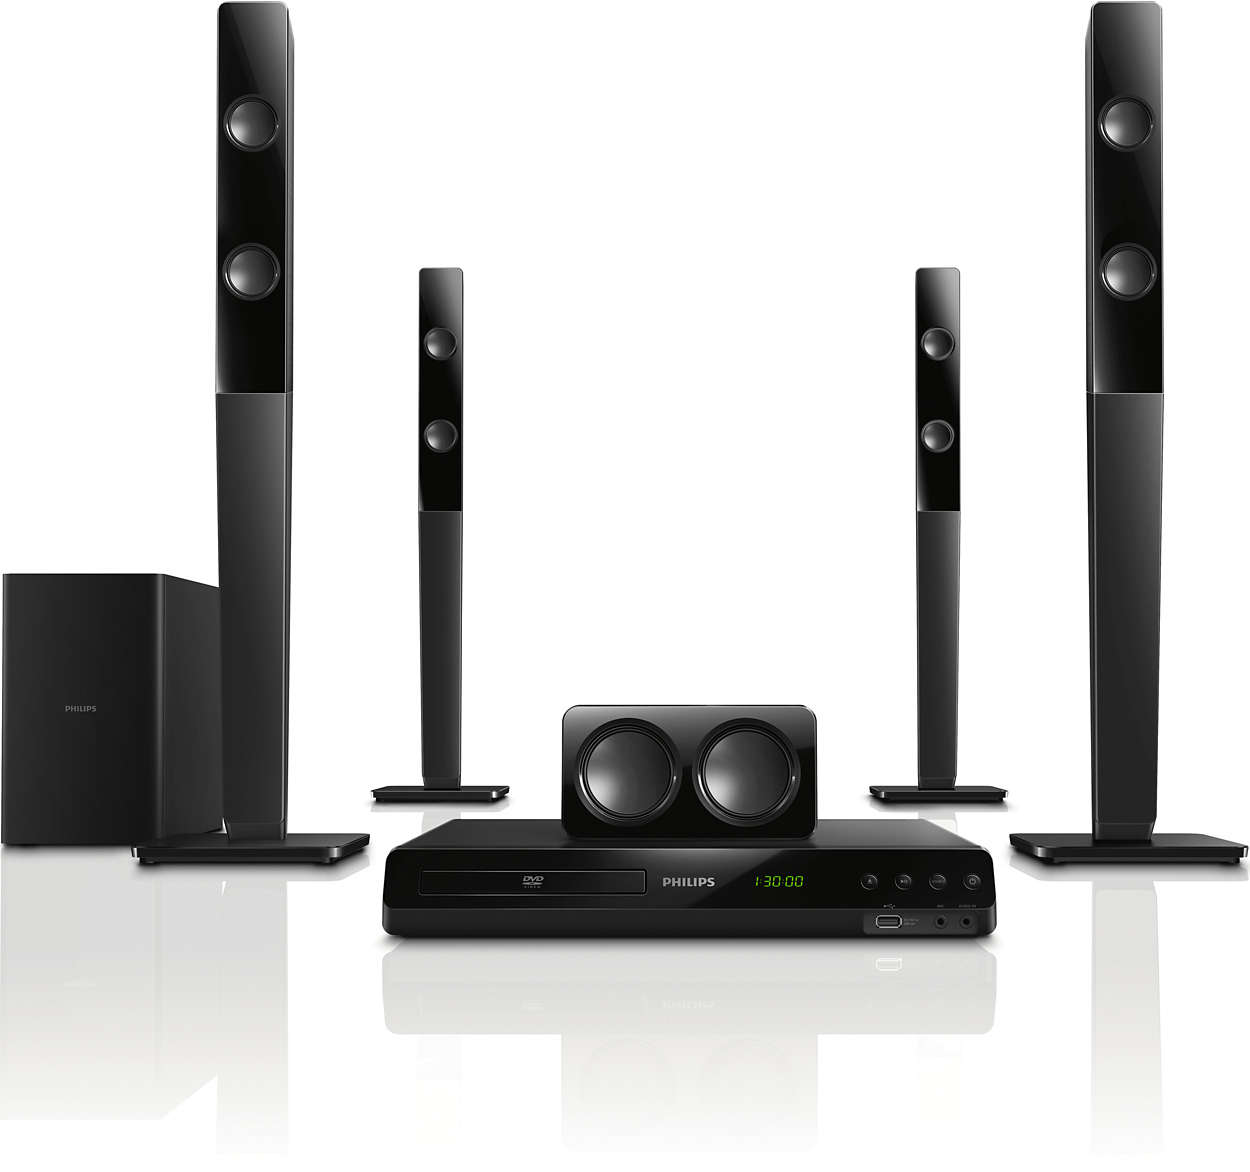 Powerful surround sound from compact speakers